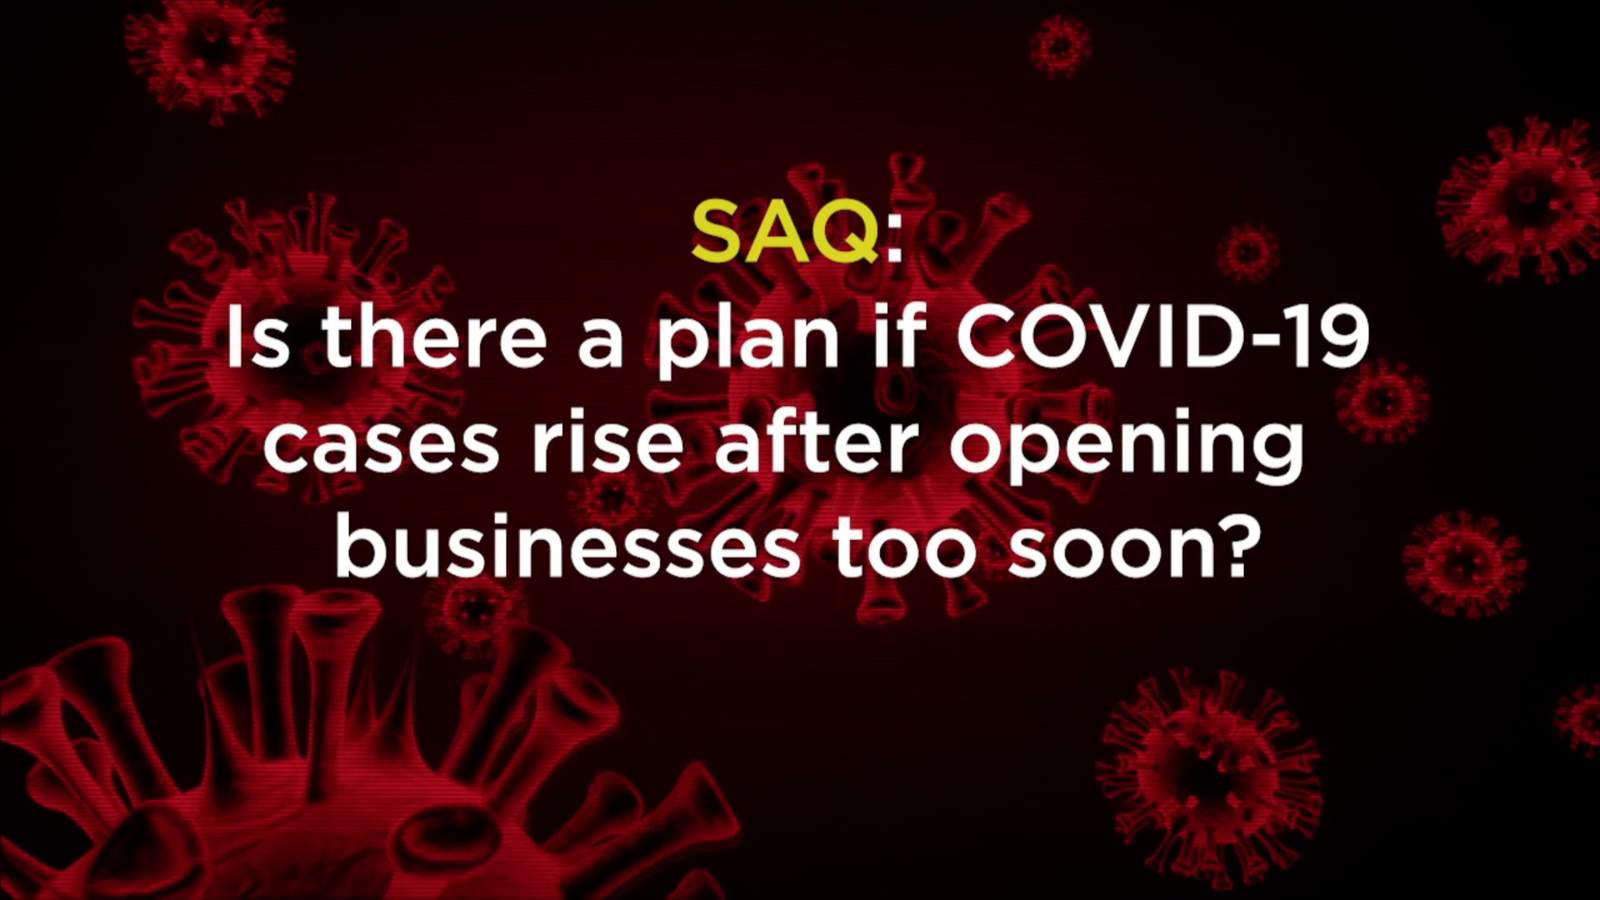 Is there a plan if COVID-19 cases rise after businesses reopen?